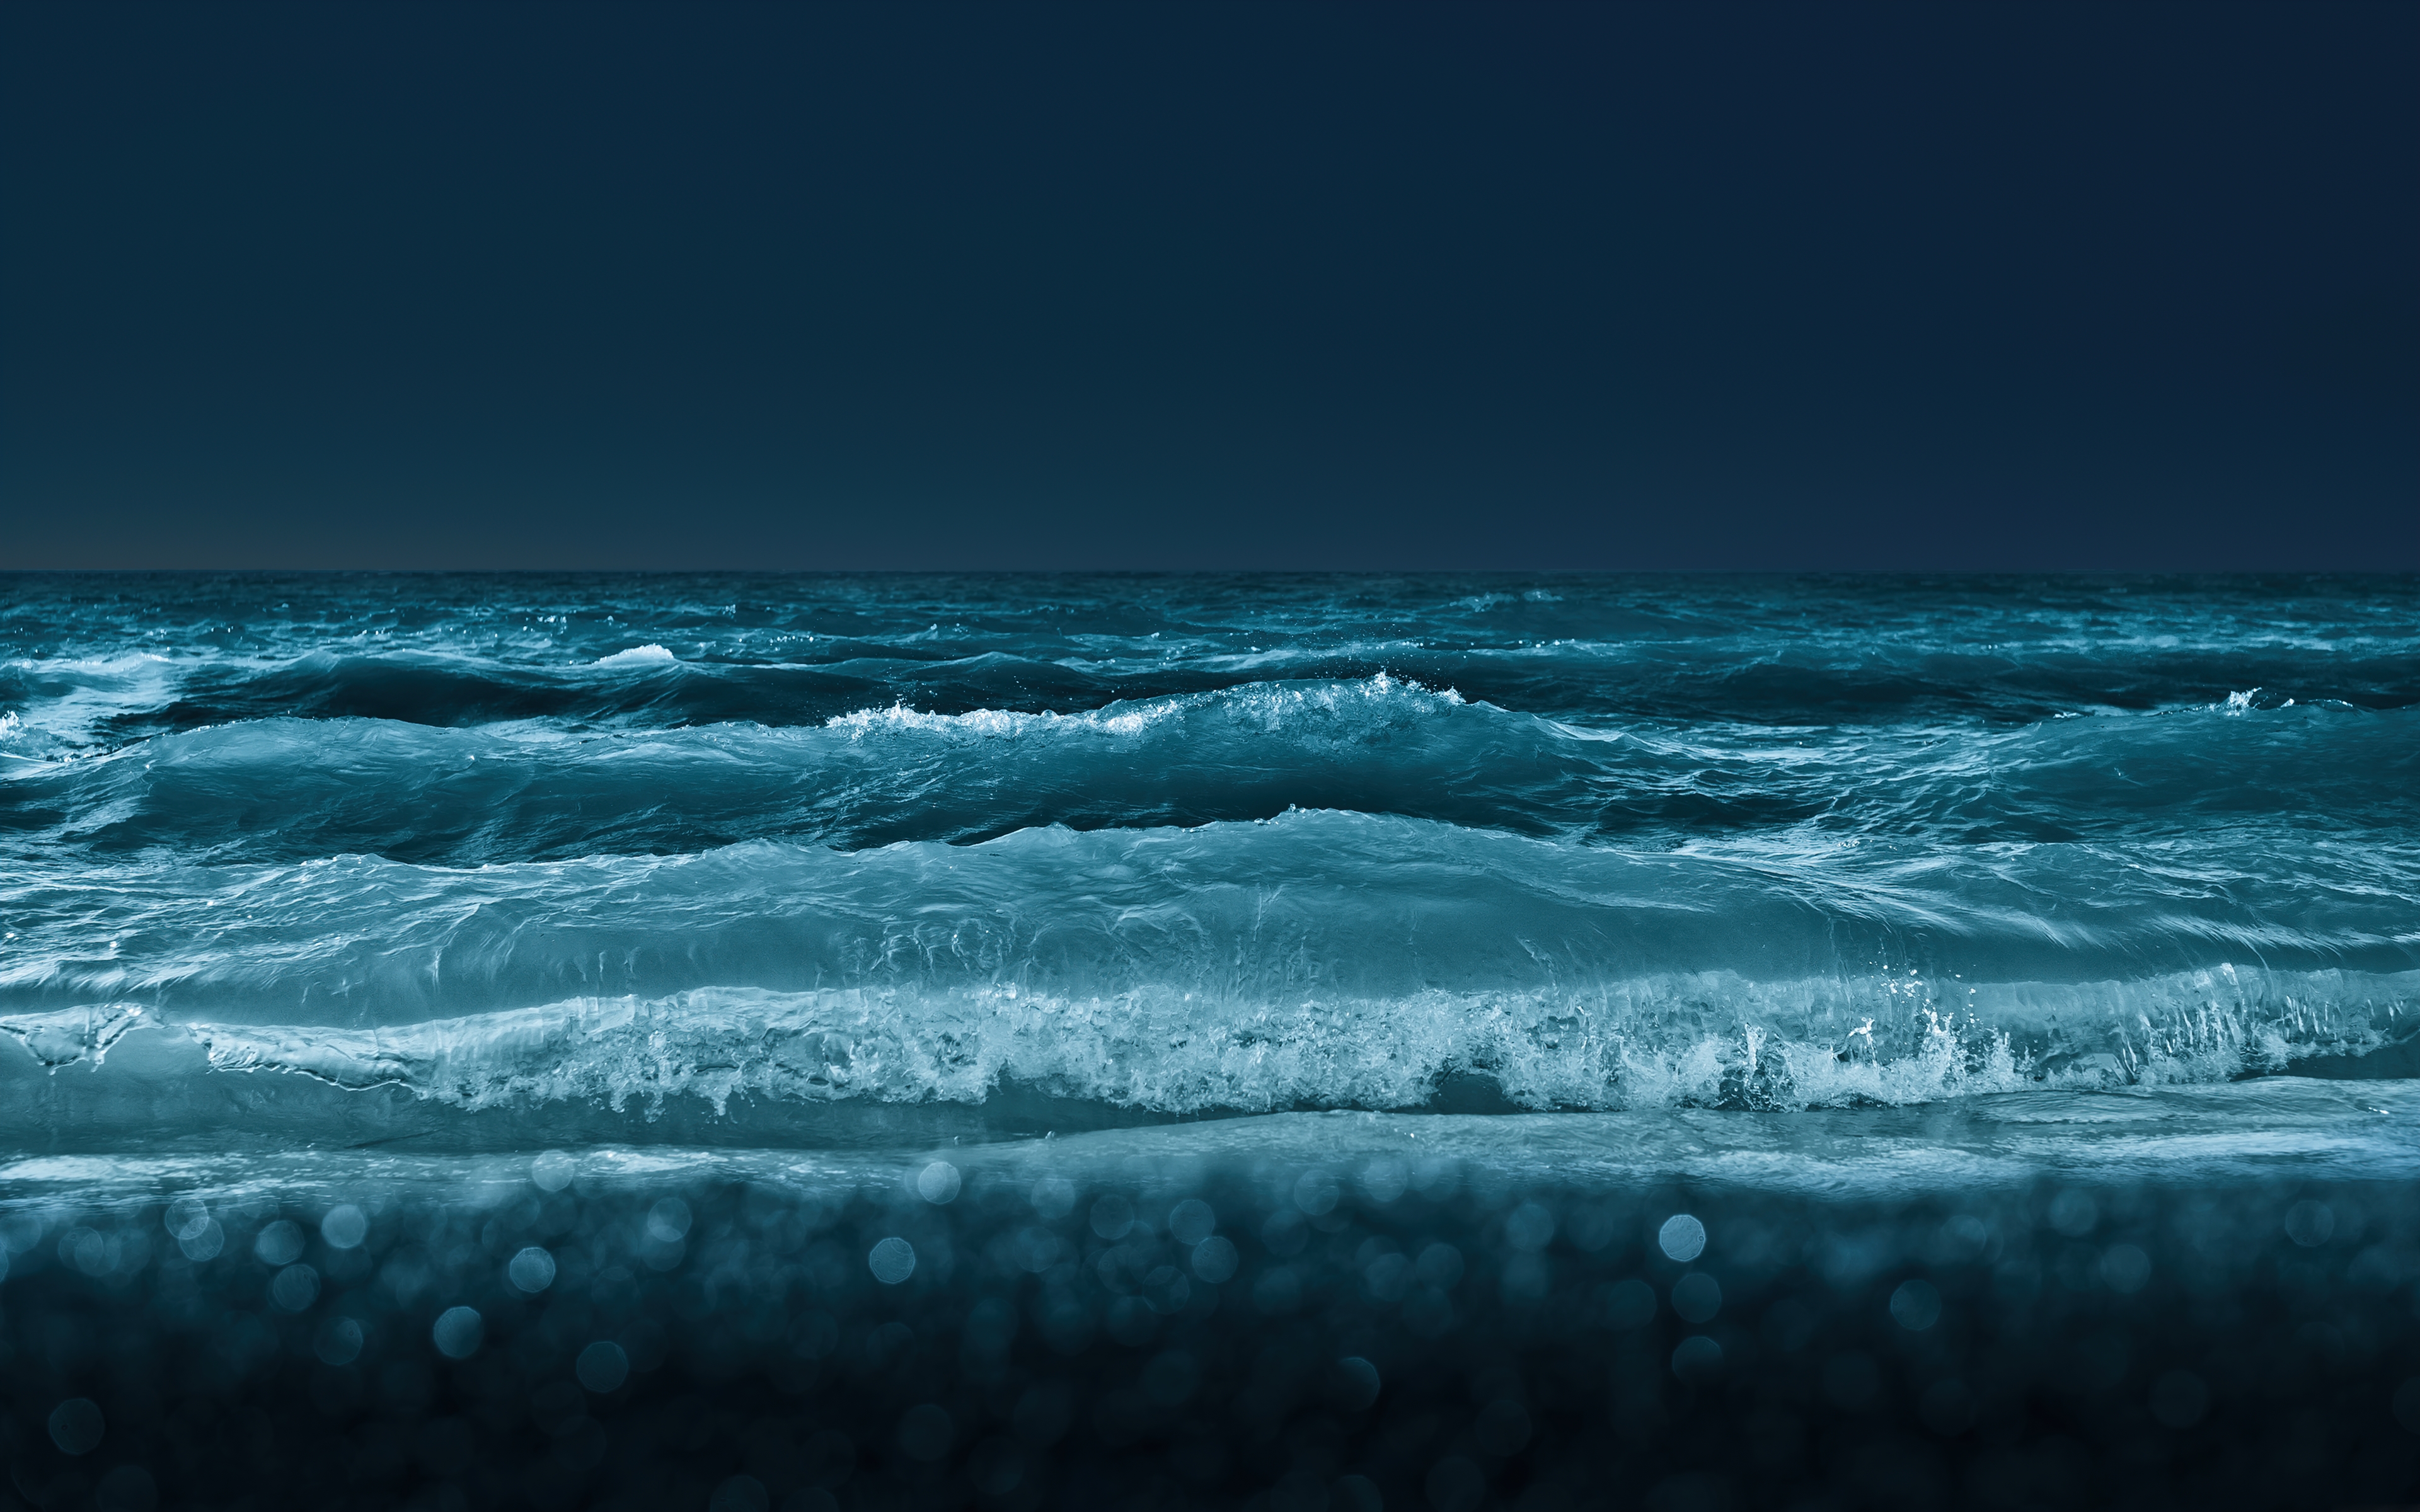 HD wallpaper, Toronto, Lake Ontario, Body Of Water, Night, Great Lakes Of North America, Waves, Cold